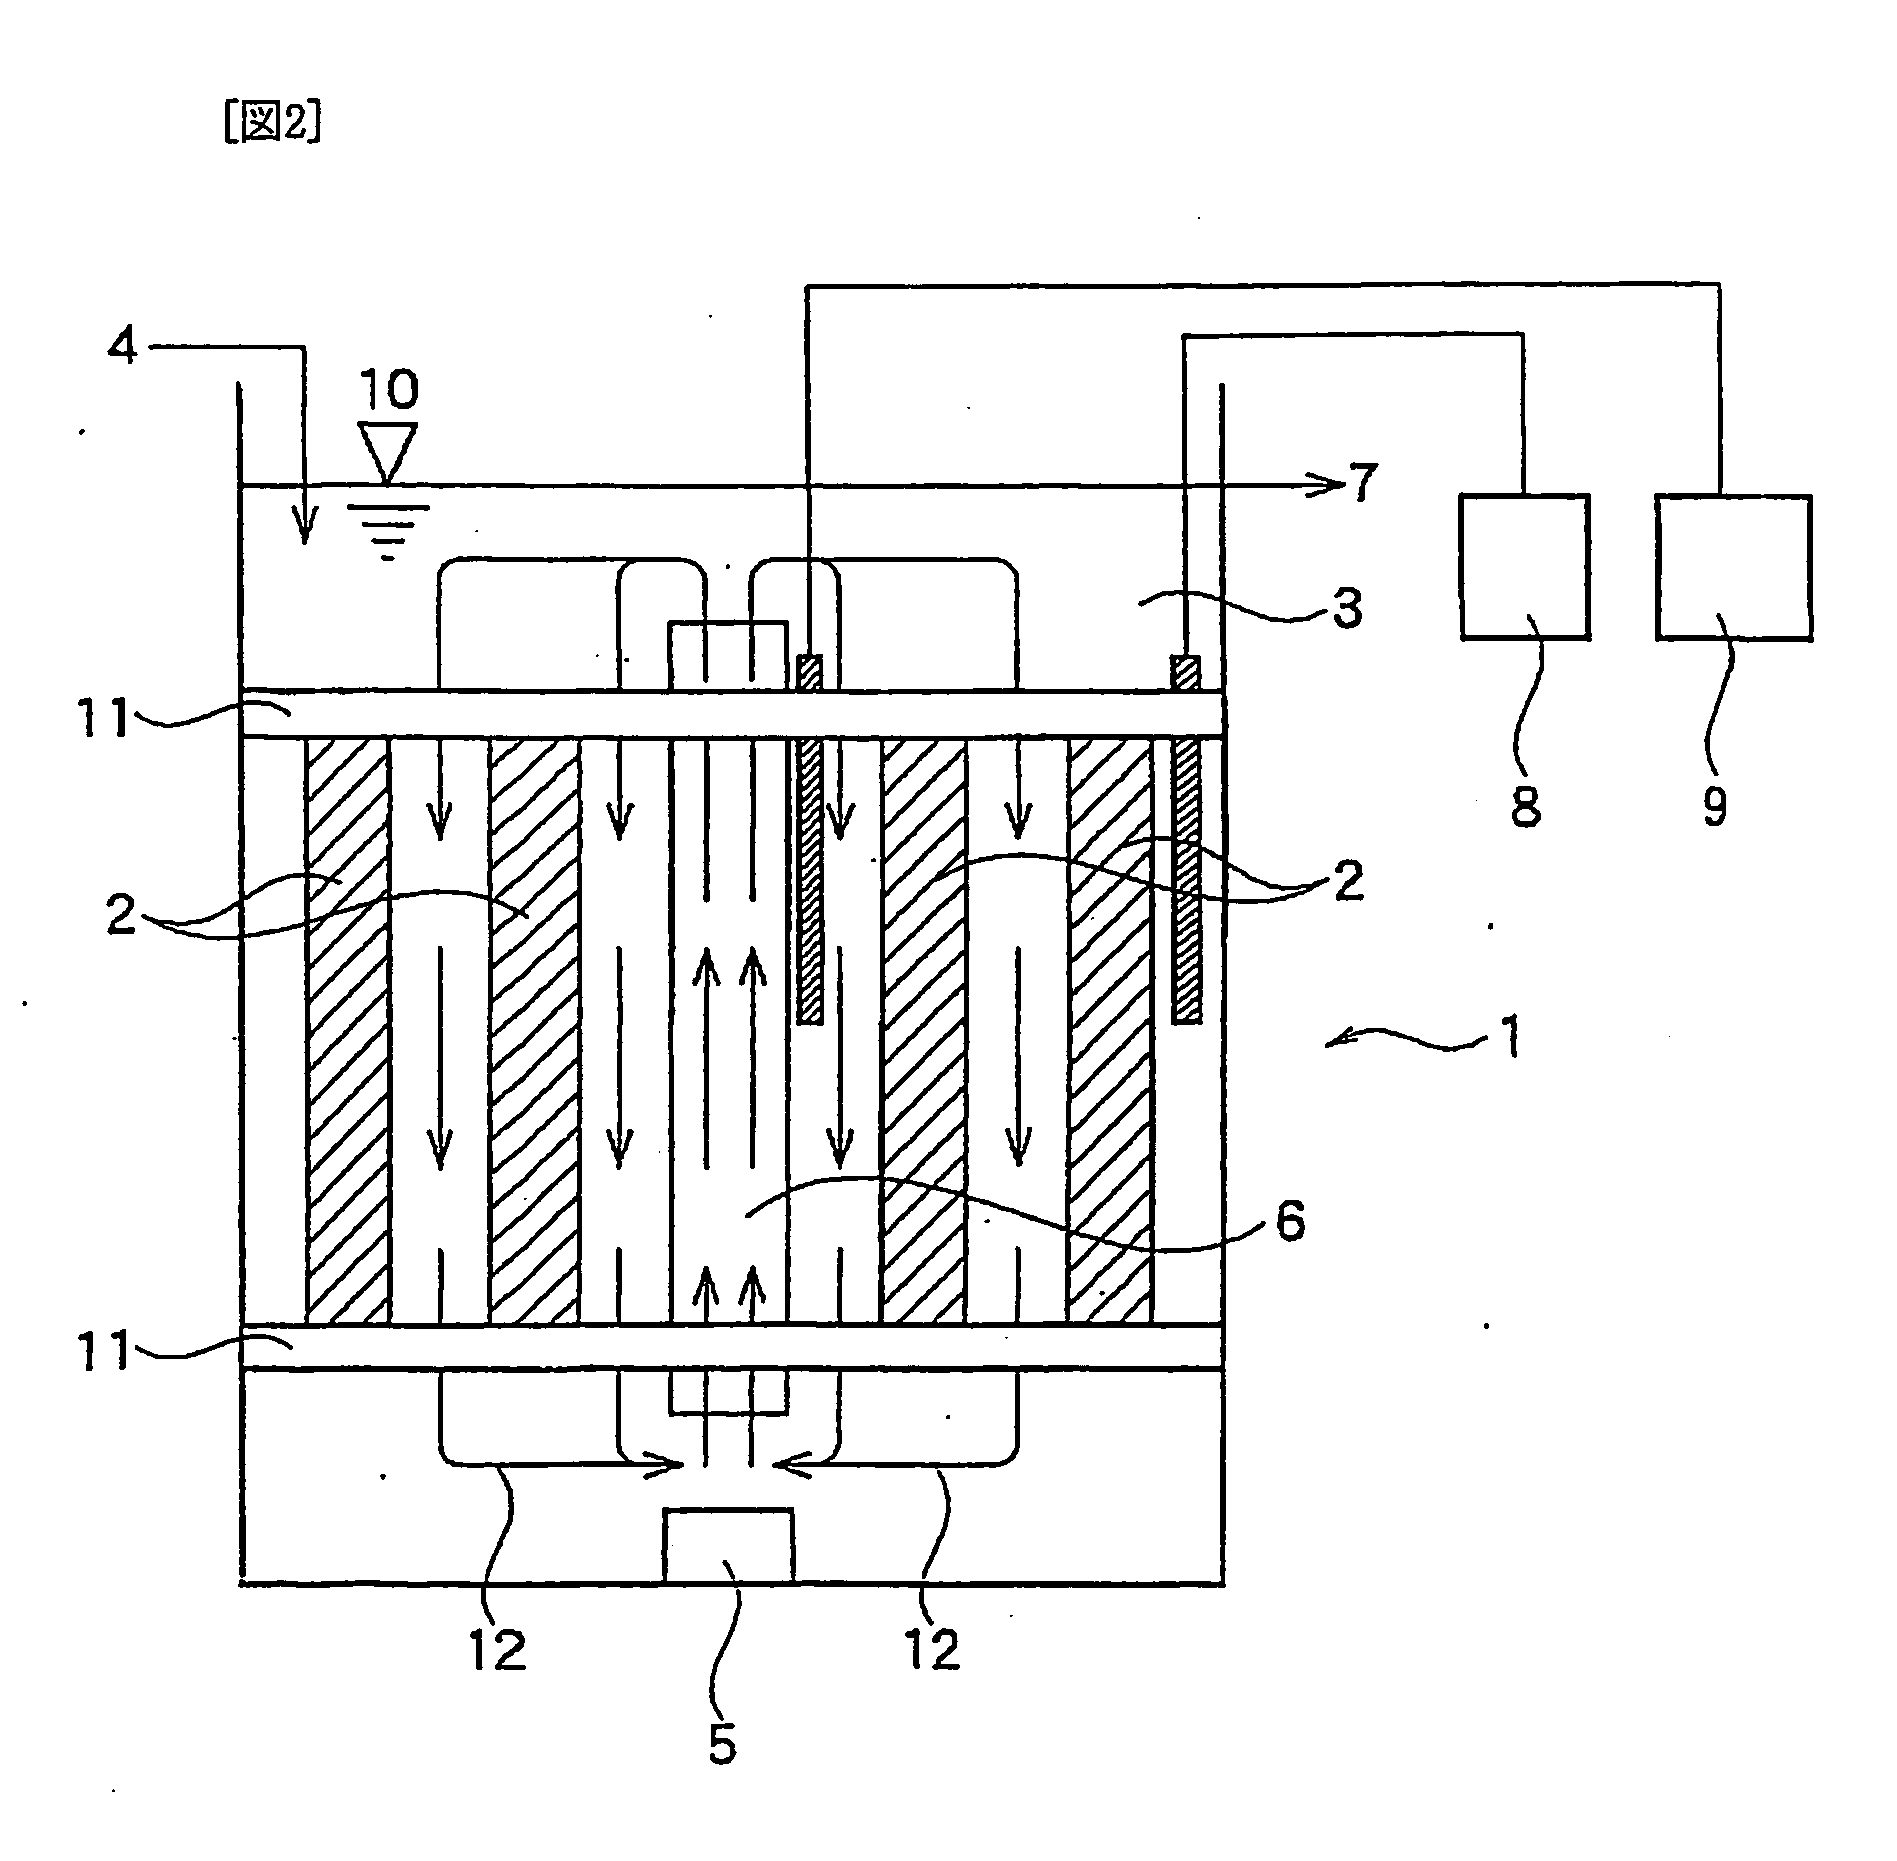 Method For Treating Ammonia-Containing Wastewater